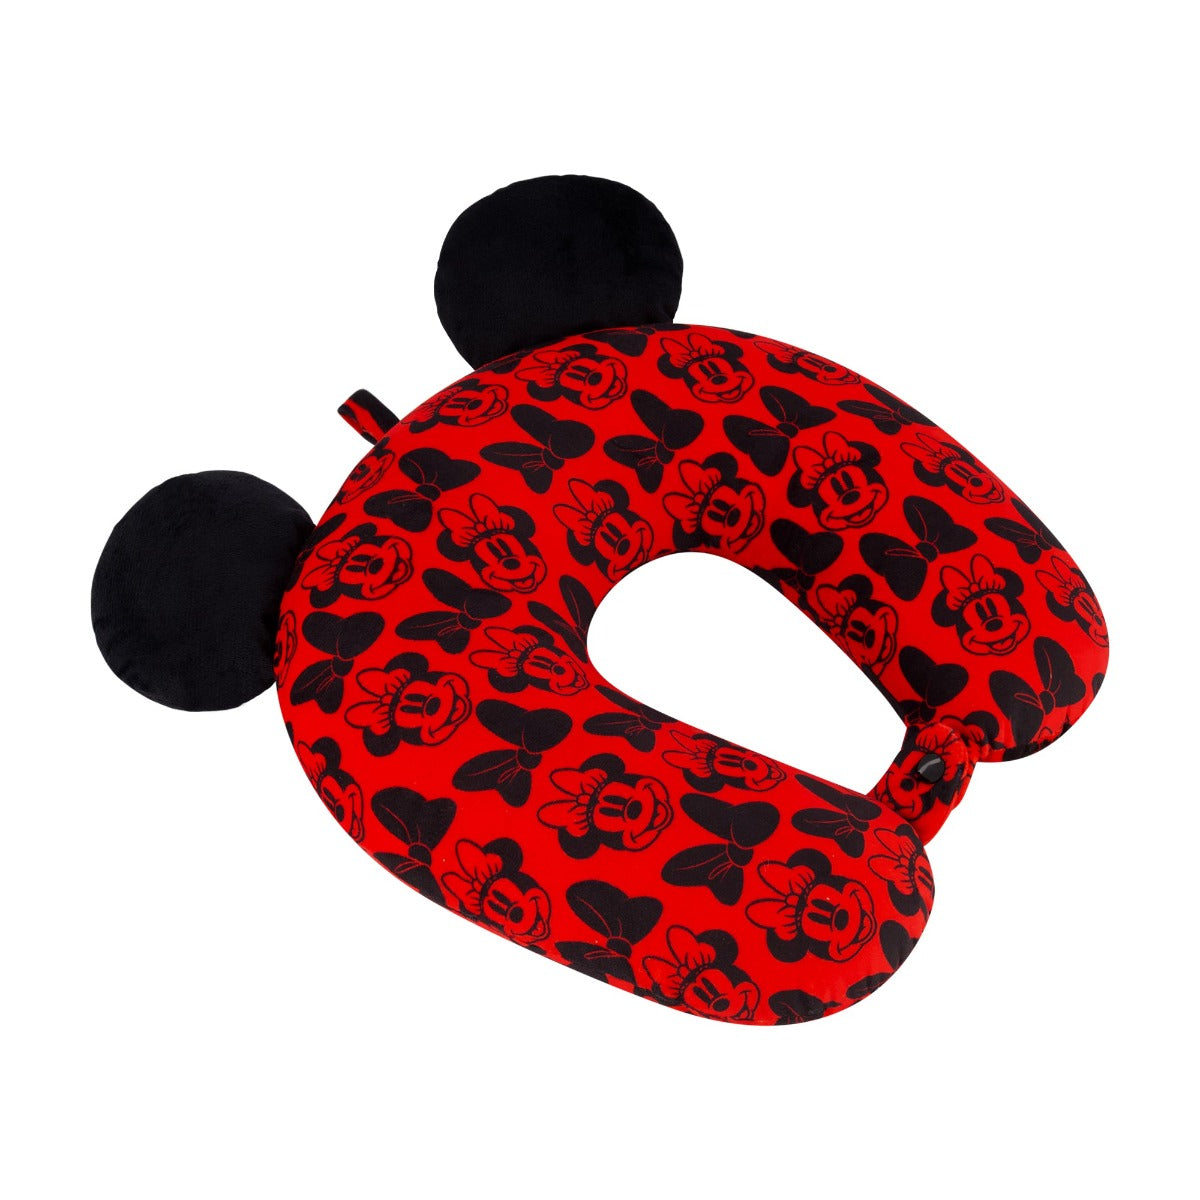 Ful disney minnie mouse red travel pillow with ears - best supportive travelling neck pillows for kids